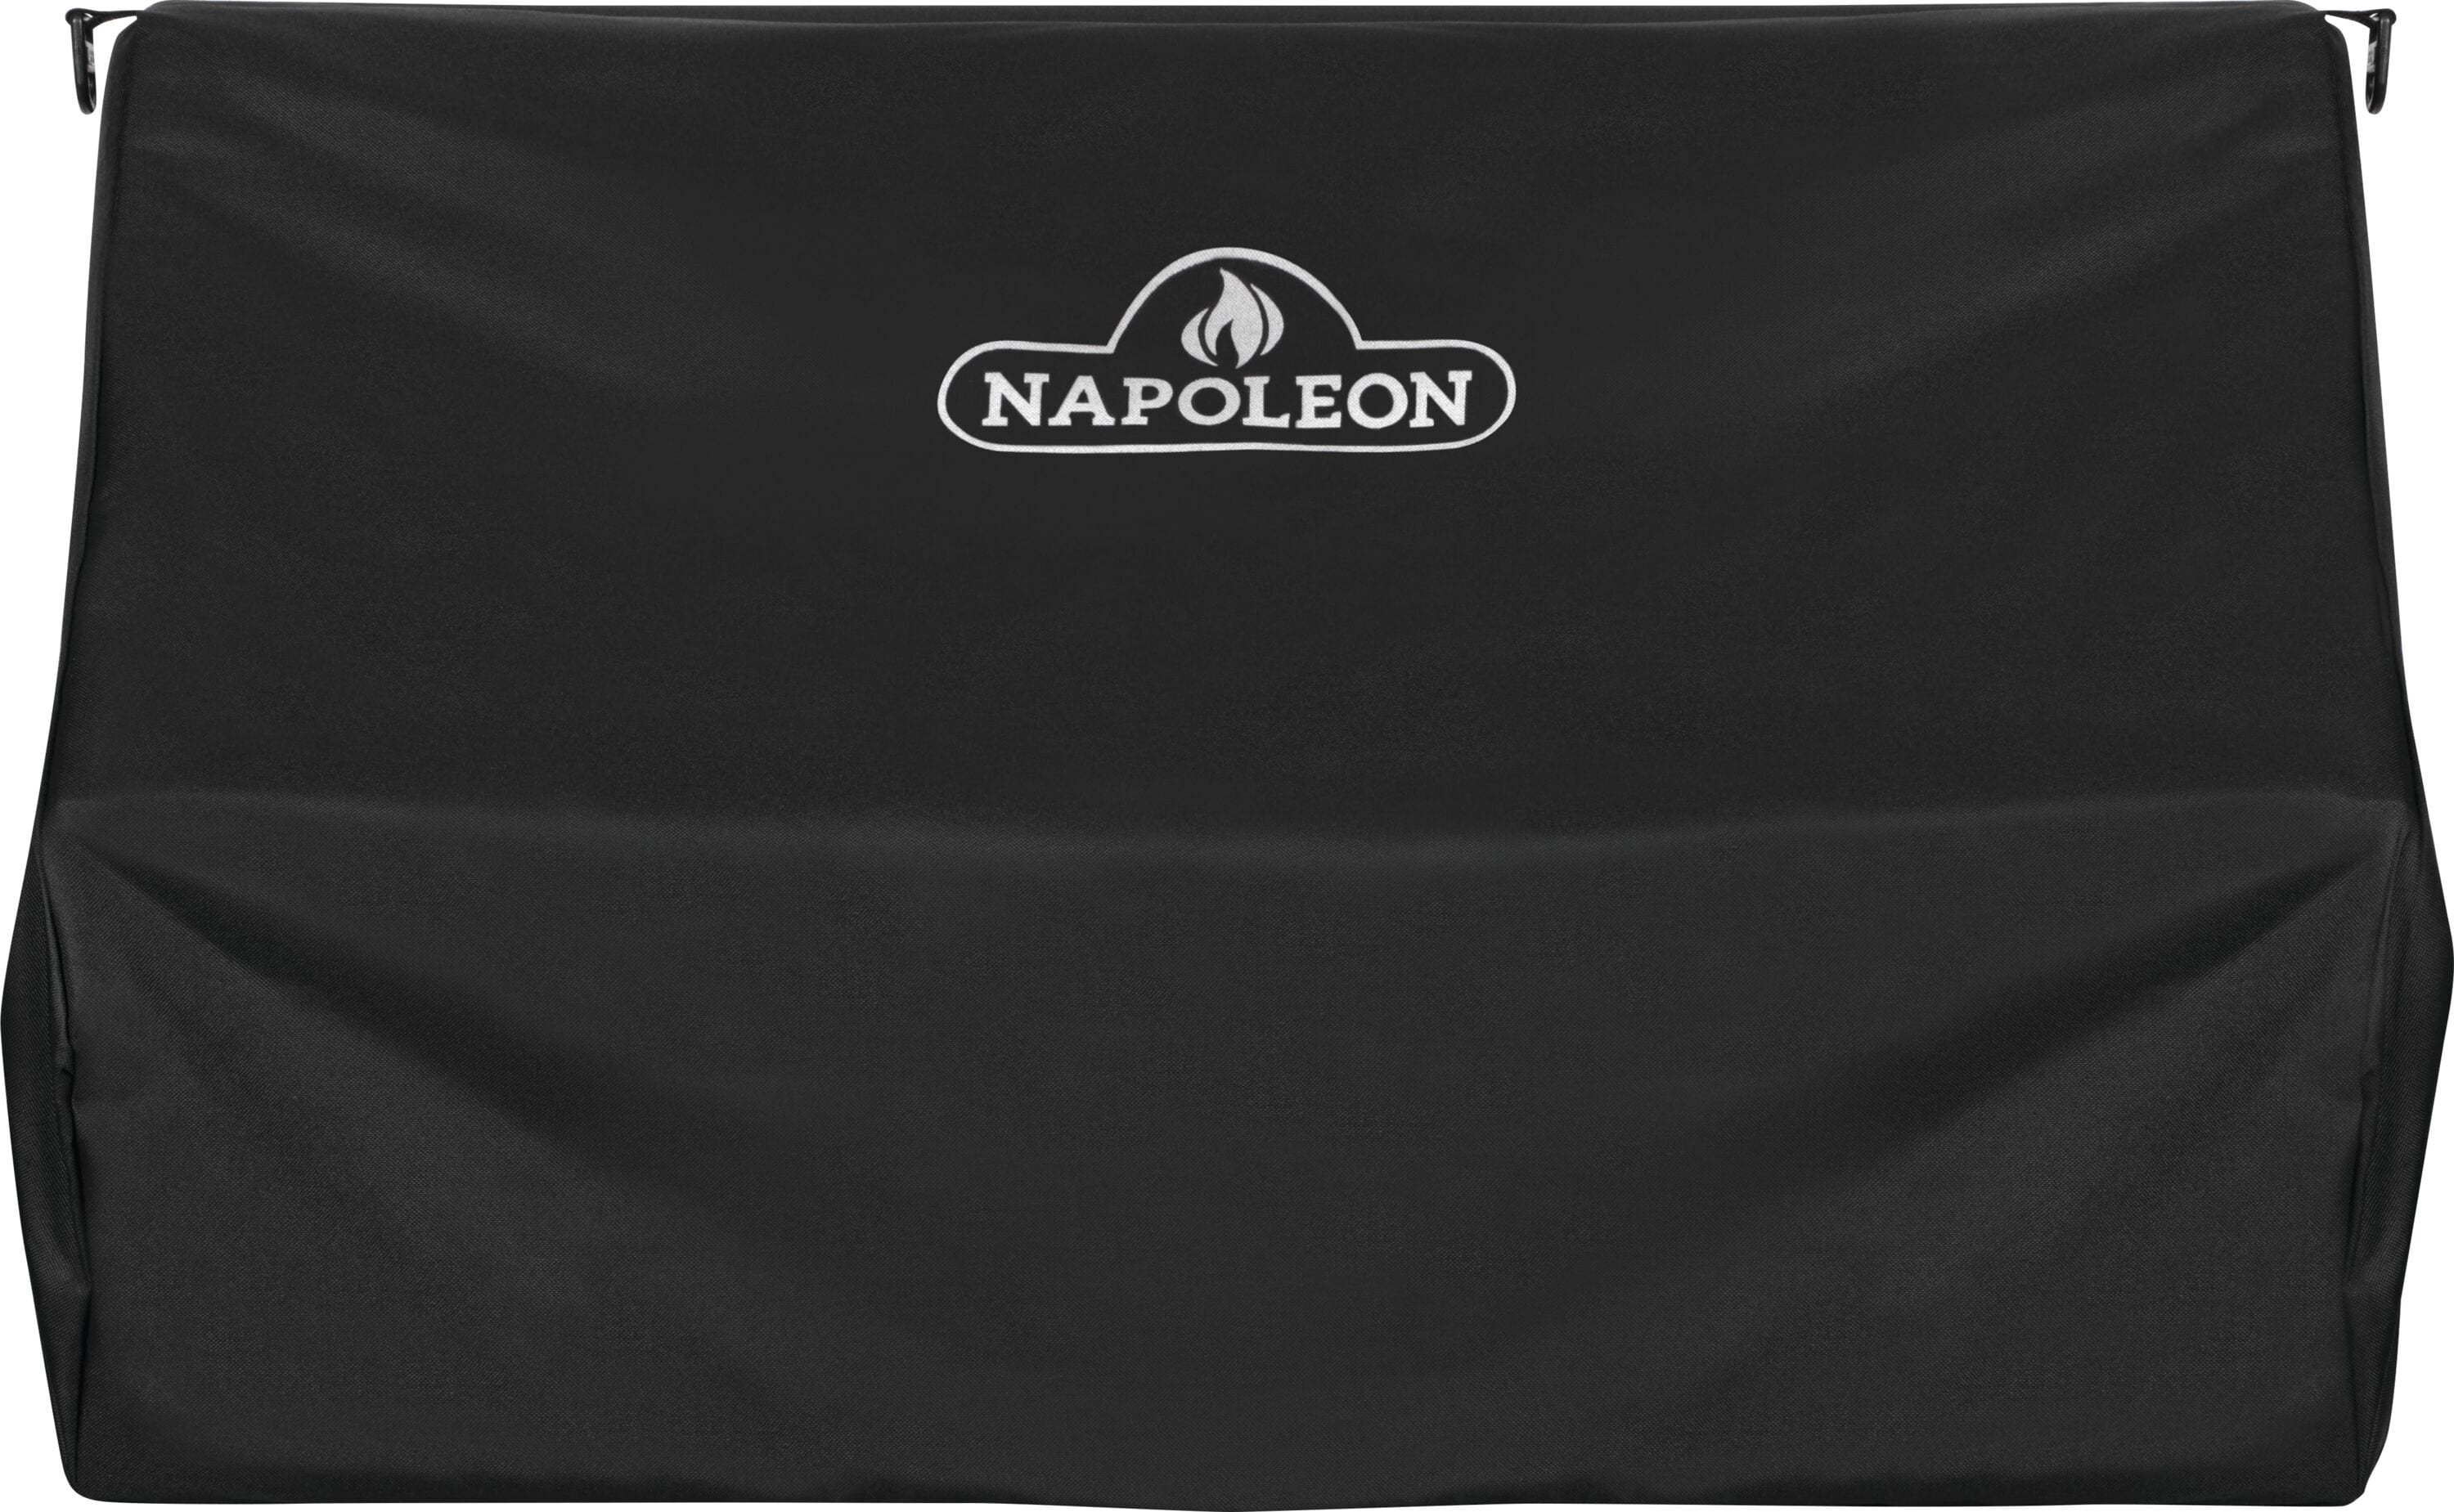 polyester-napoleon-grill-covers-grills-outdoor-cooking-at-lowes